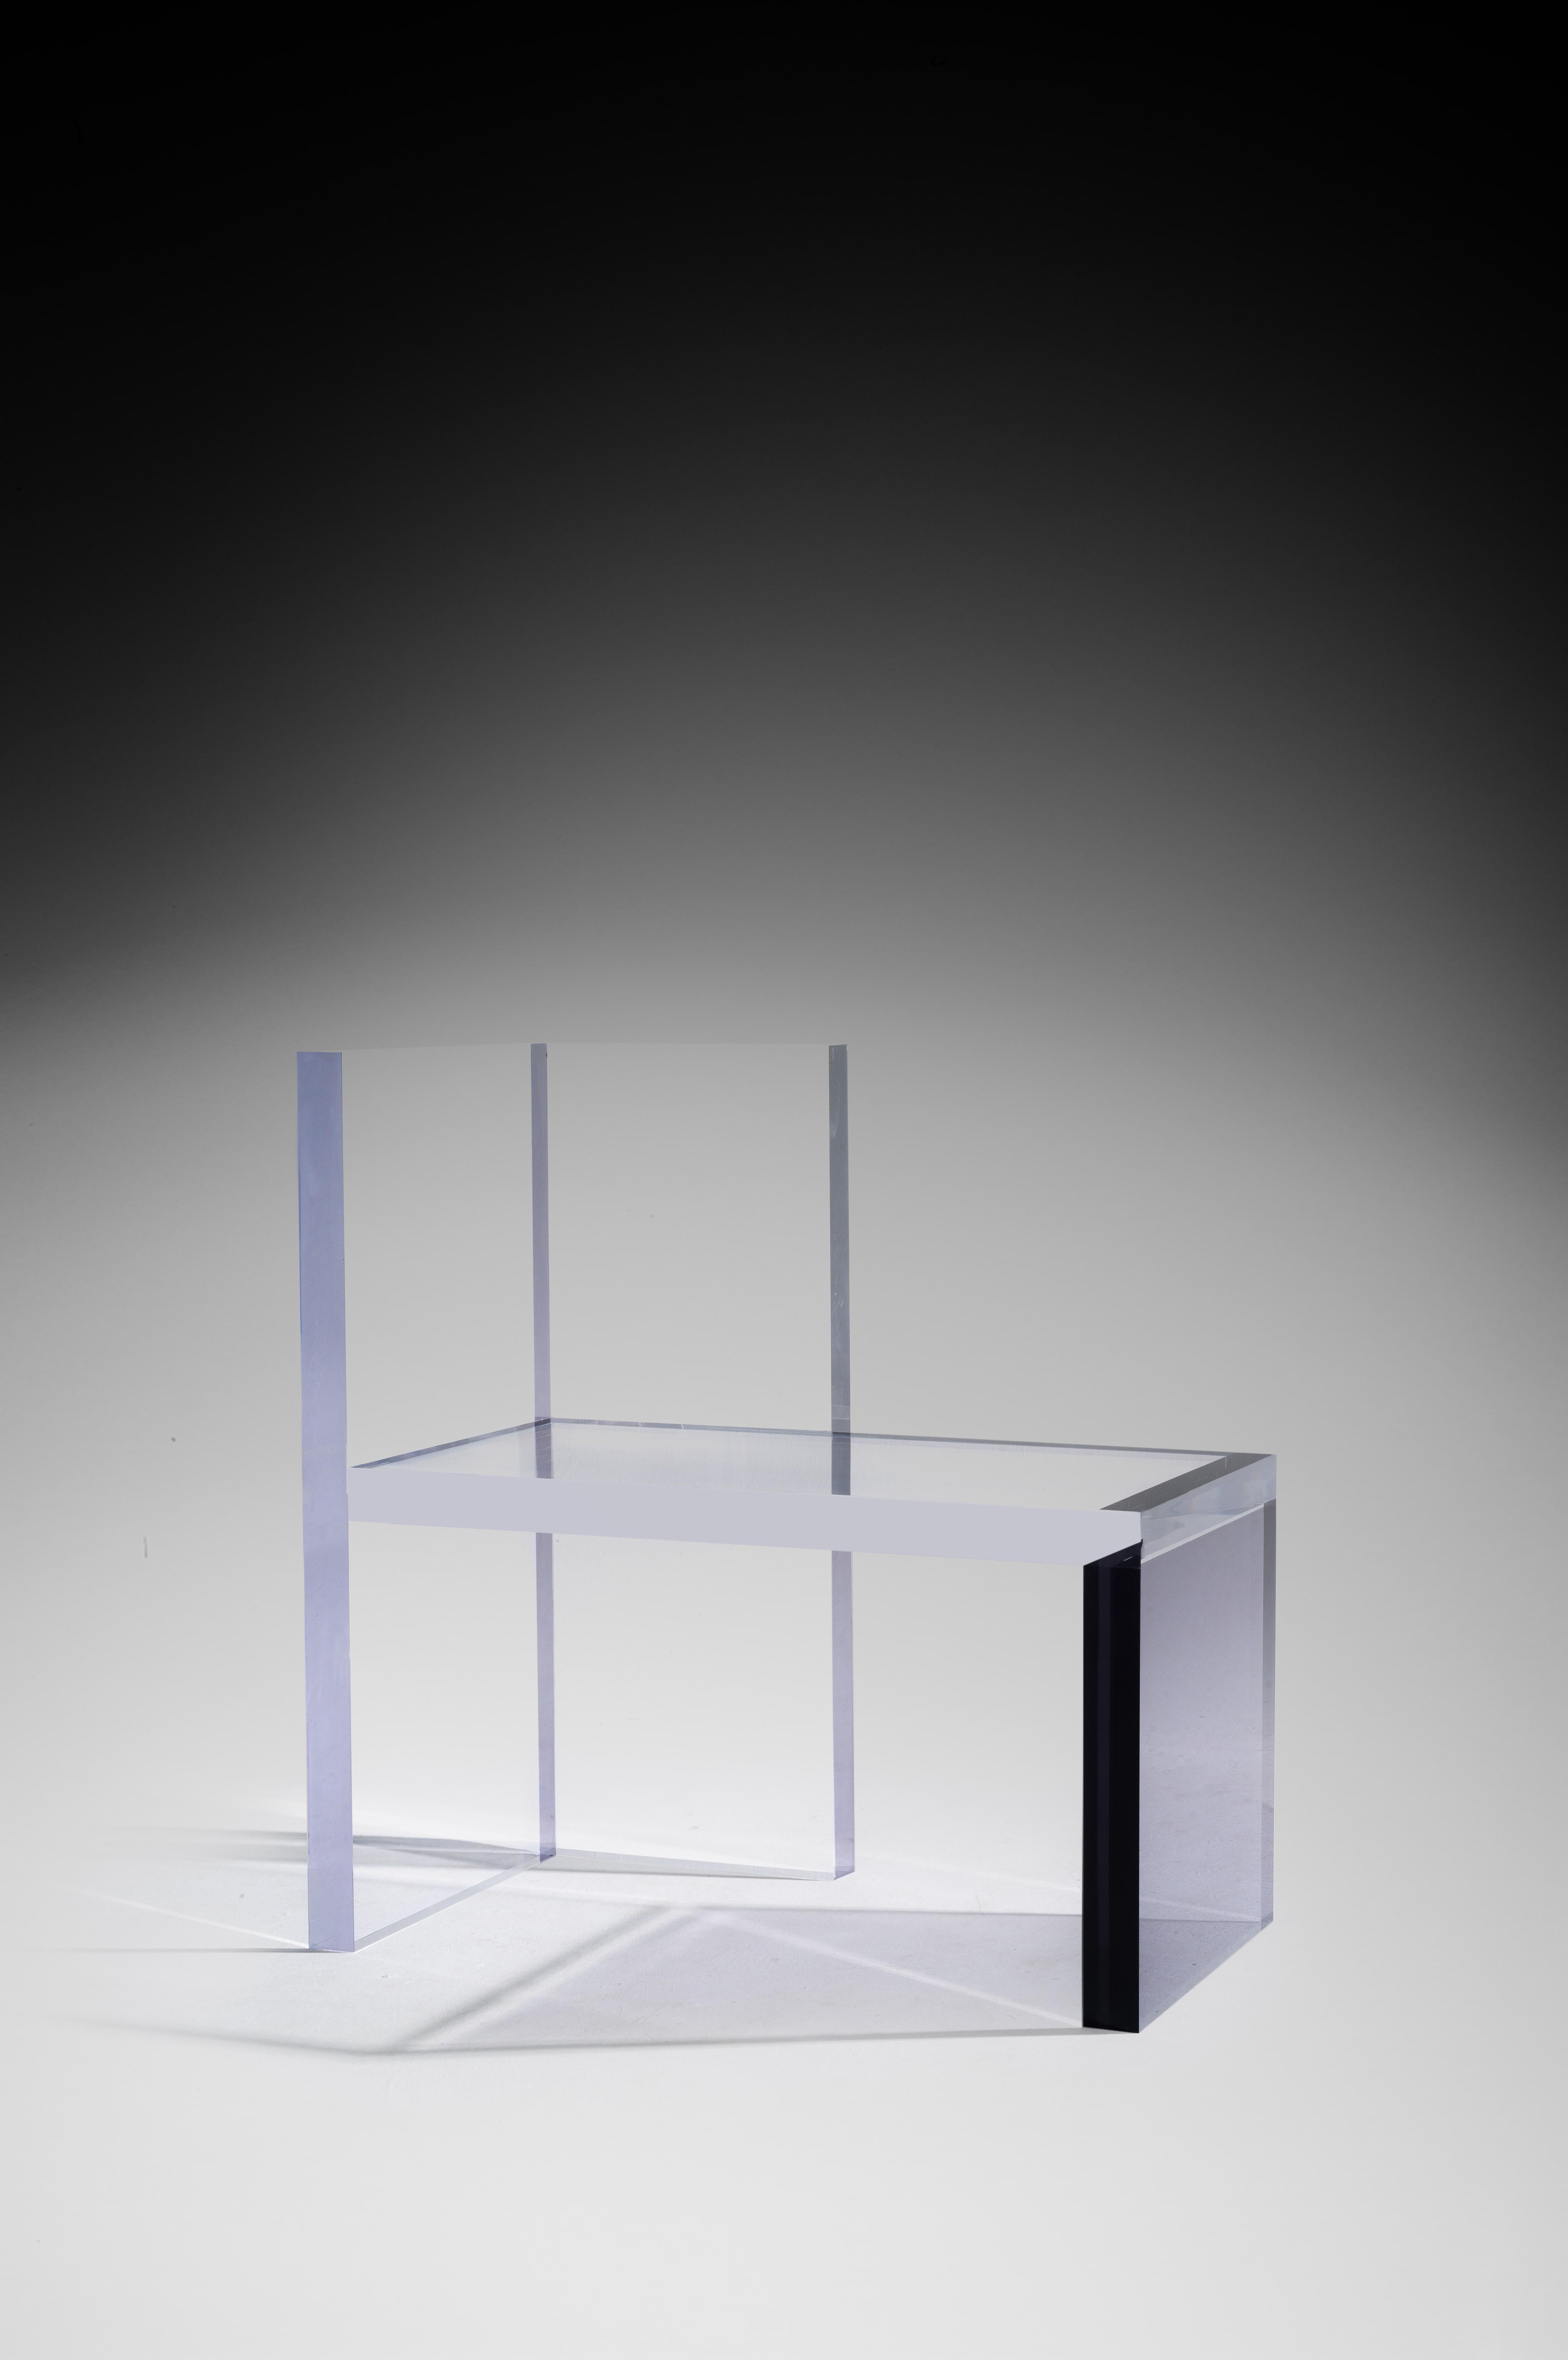 Ghost Altuglas chair by Charly Bounan
Hand-sculpted Altuglas design artwork
Dimensions: 100 x 50 x 106 cm
Material: Plexiglass
Signed Charly Bounan

Charly Bounan, is a Parisian designer renowned for its refined creative style and the